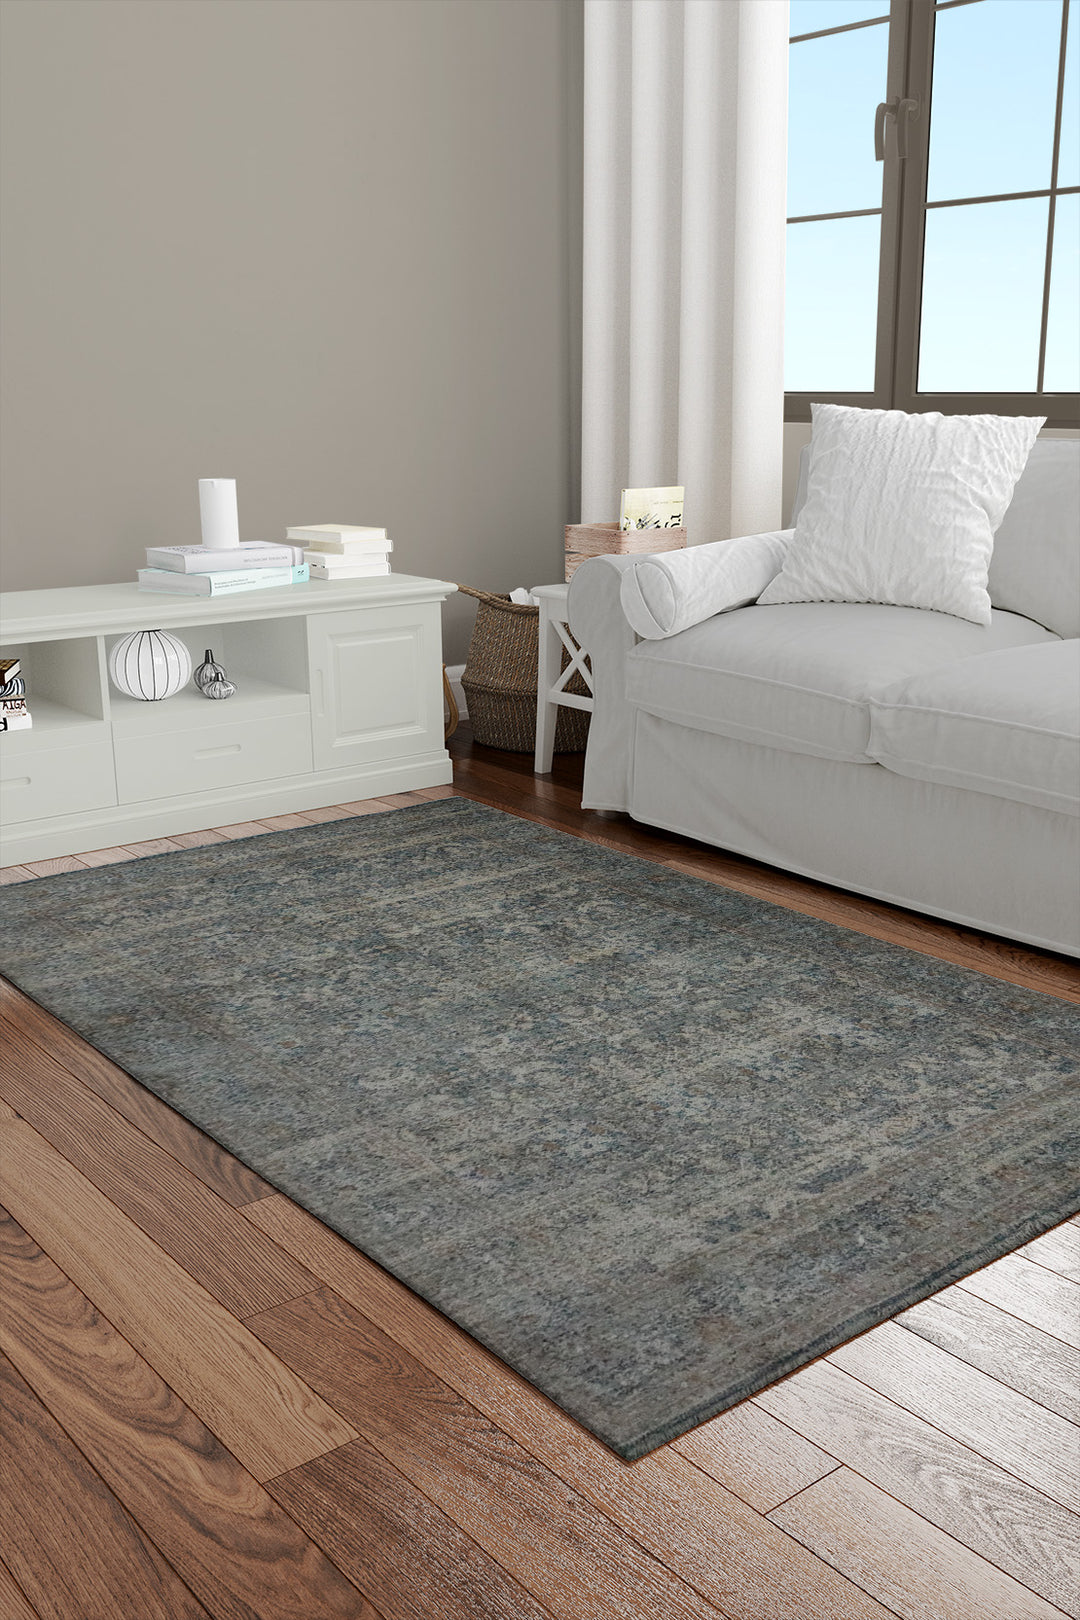 Turkish Modern  Festival Plus Rug - Gray - 3.9 x 5.5 FT - Superior Comfort, Modern Style Accent Rugs